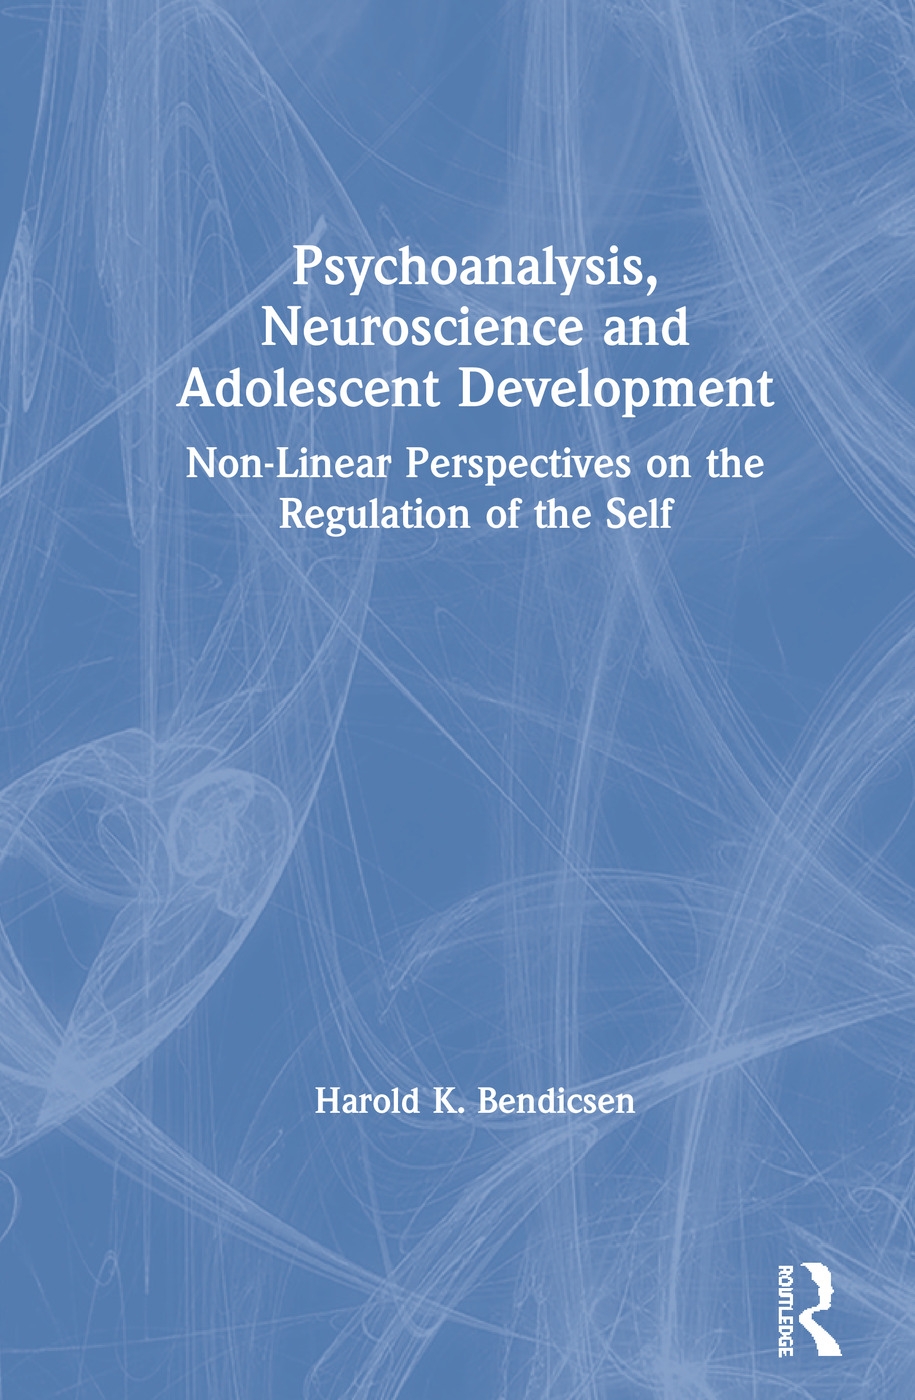 Psychoanalysis, Neuroscience and Adolescent Development: Non-Linear Perspectives on the Regulation of the Self